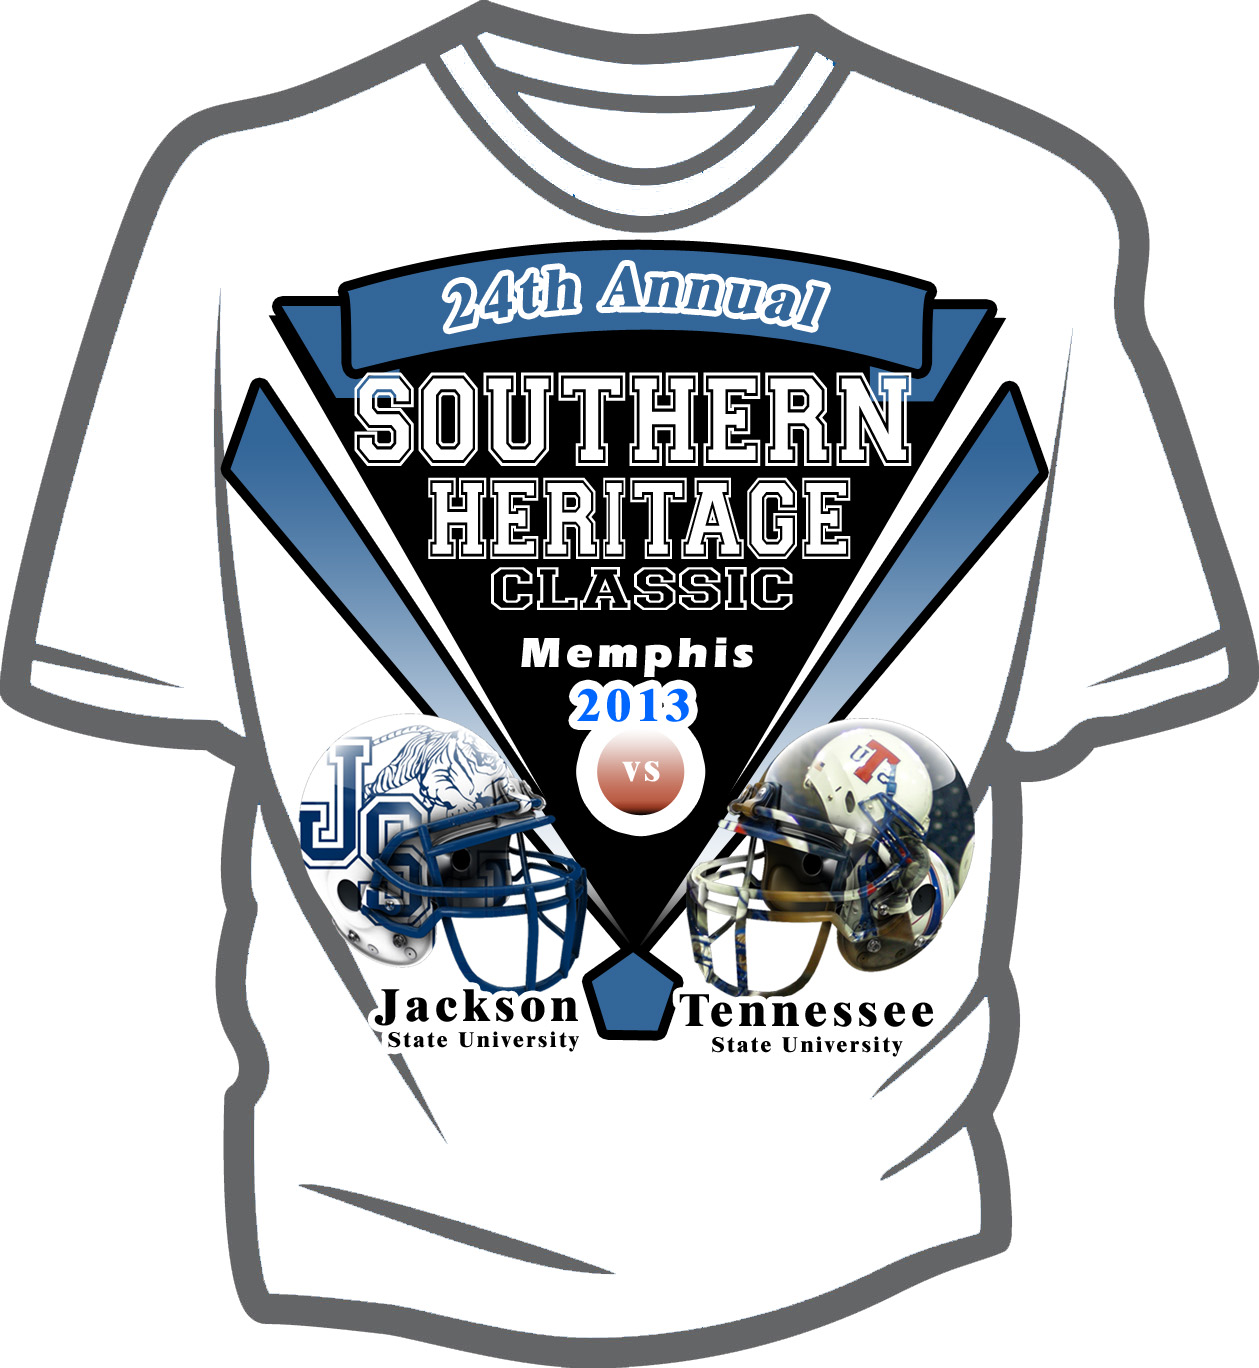 Black College Football T-Shirts : Southern Heritage Classic Memphis ...